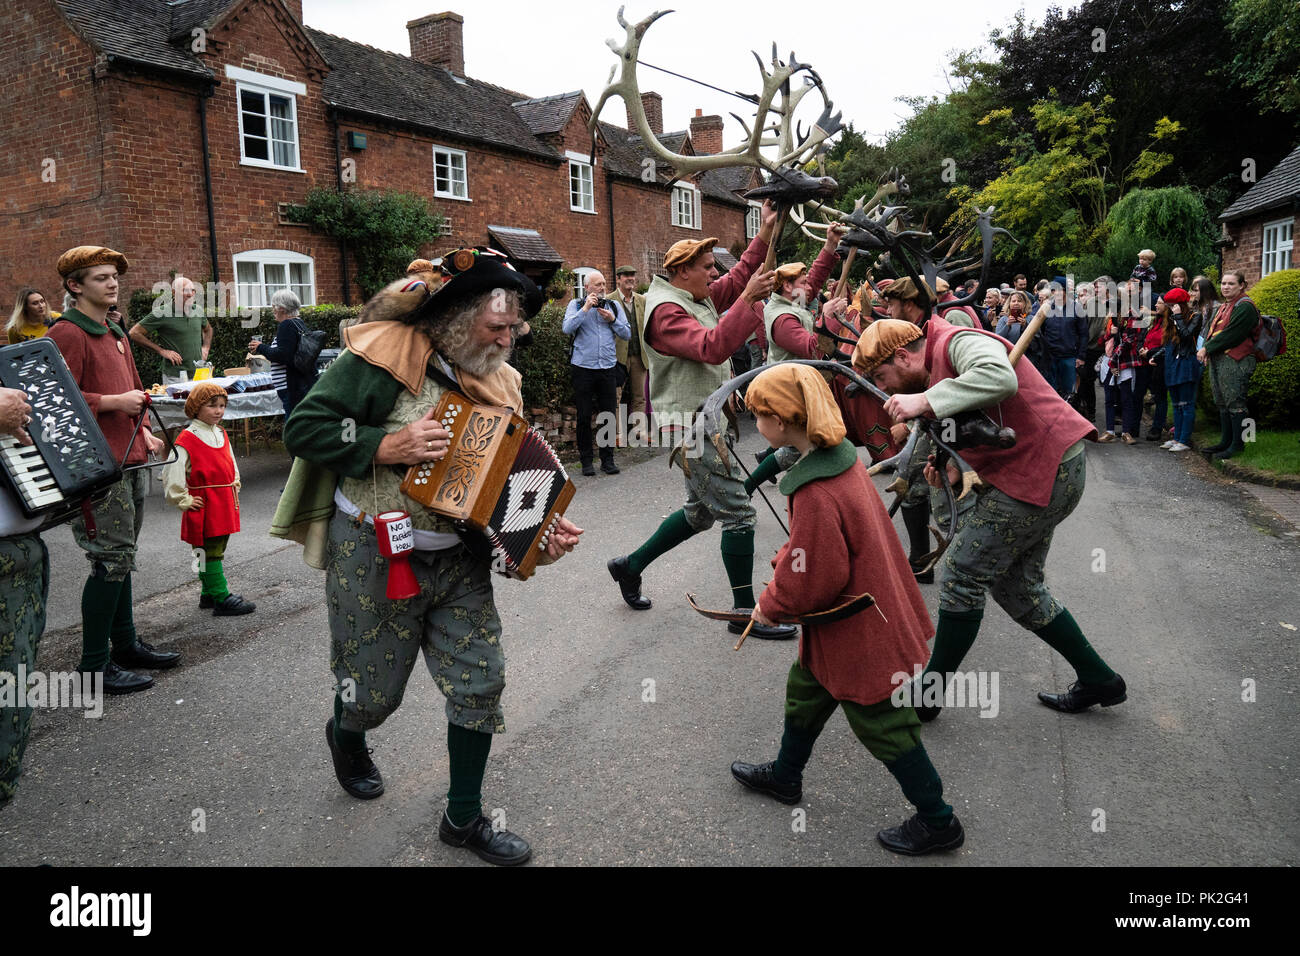 Abbots Bromley, Staffs, UK.  10th Sep, 2018. The Abbots Bromley Horn Dance is one of the oldest annual rural customs still taking place today. After collecting the horns from the church in the morning, the six Deer-men, a Fool, a Hobby Horse, Bowman and Maid Marian, perform their dance to music at locations throughout the village of Abbots Bromley and surrounding farms and pubs, today September 10, 2018 in Abbots Bromley, Staffordshire. Credit: David Levenson/Alamy Live News Stock Photo